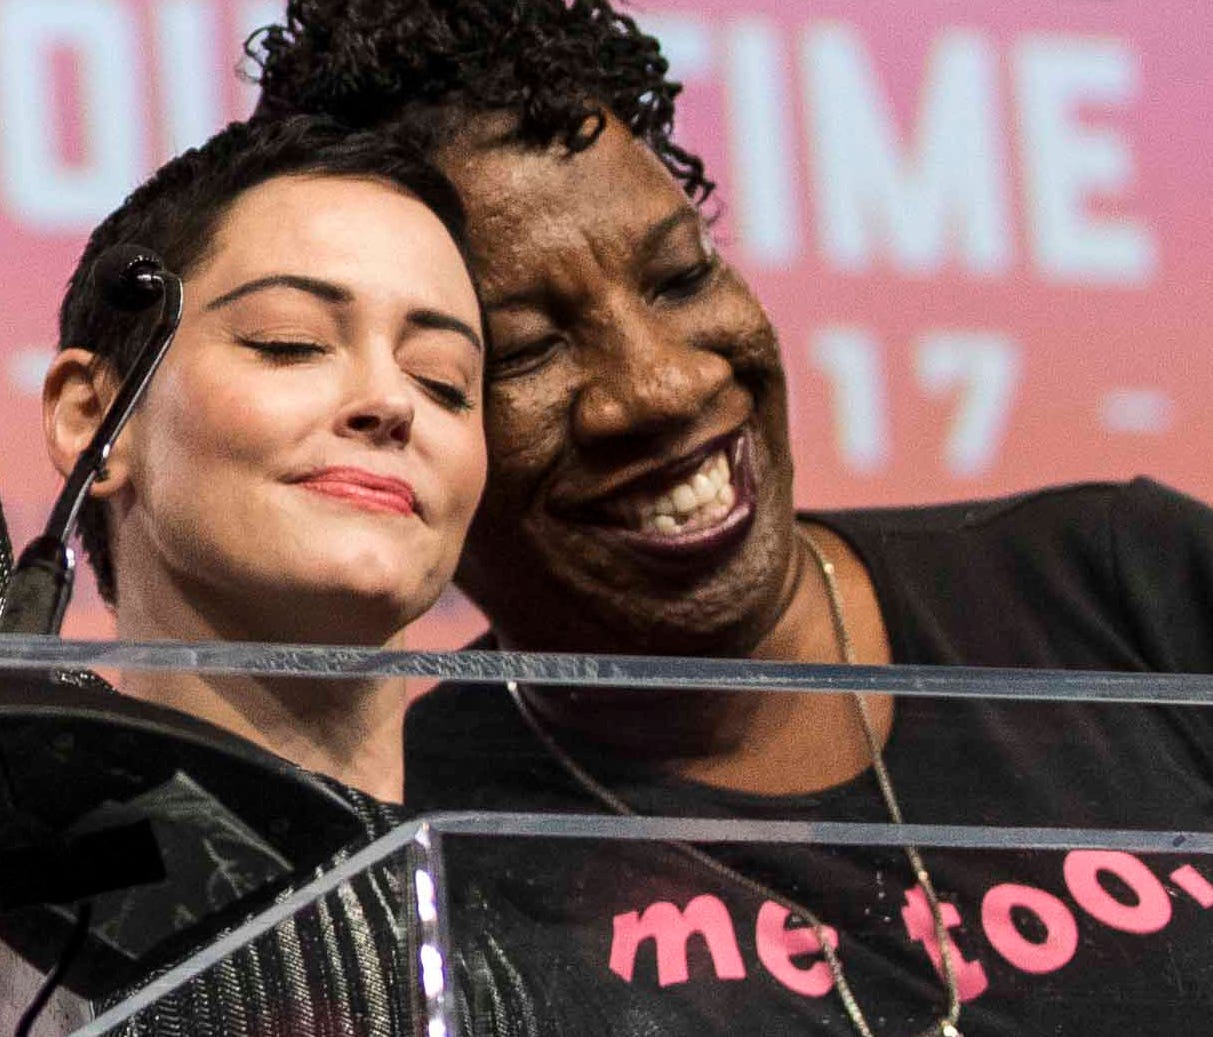 McGowan hugs Tarana Burke (right) the creator of #MeToo, as she was being introduced to the stage during Fighting for Survivors of Sexual Assault in the Age of Betsy DeVos during The Women's Convention at Cobo Center.